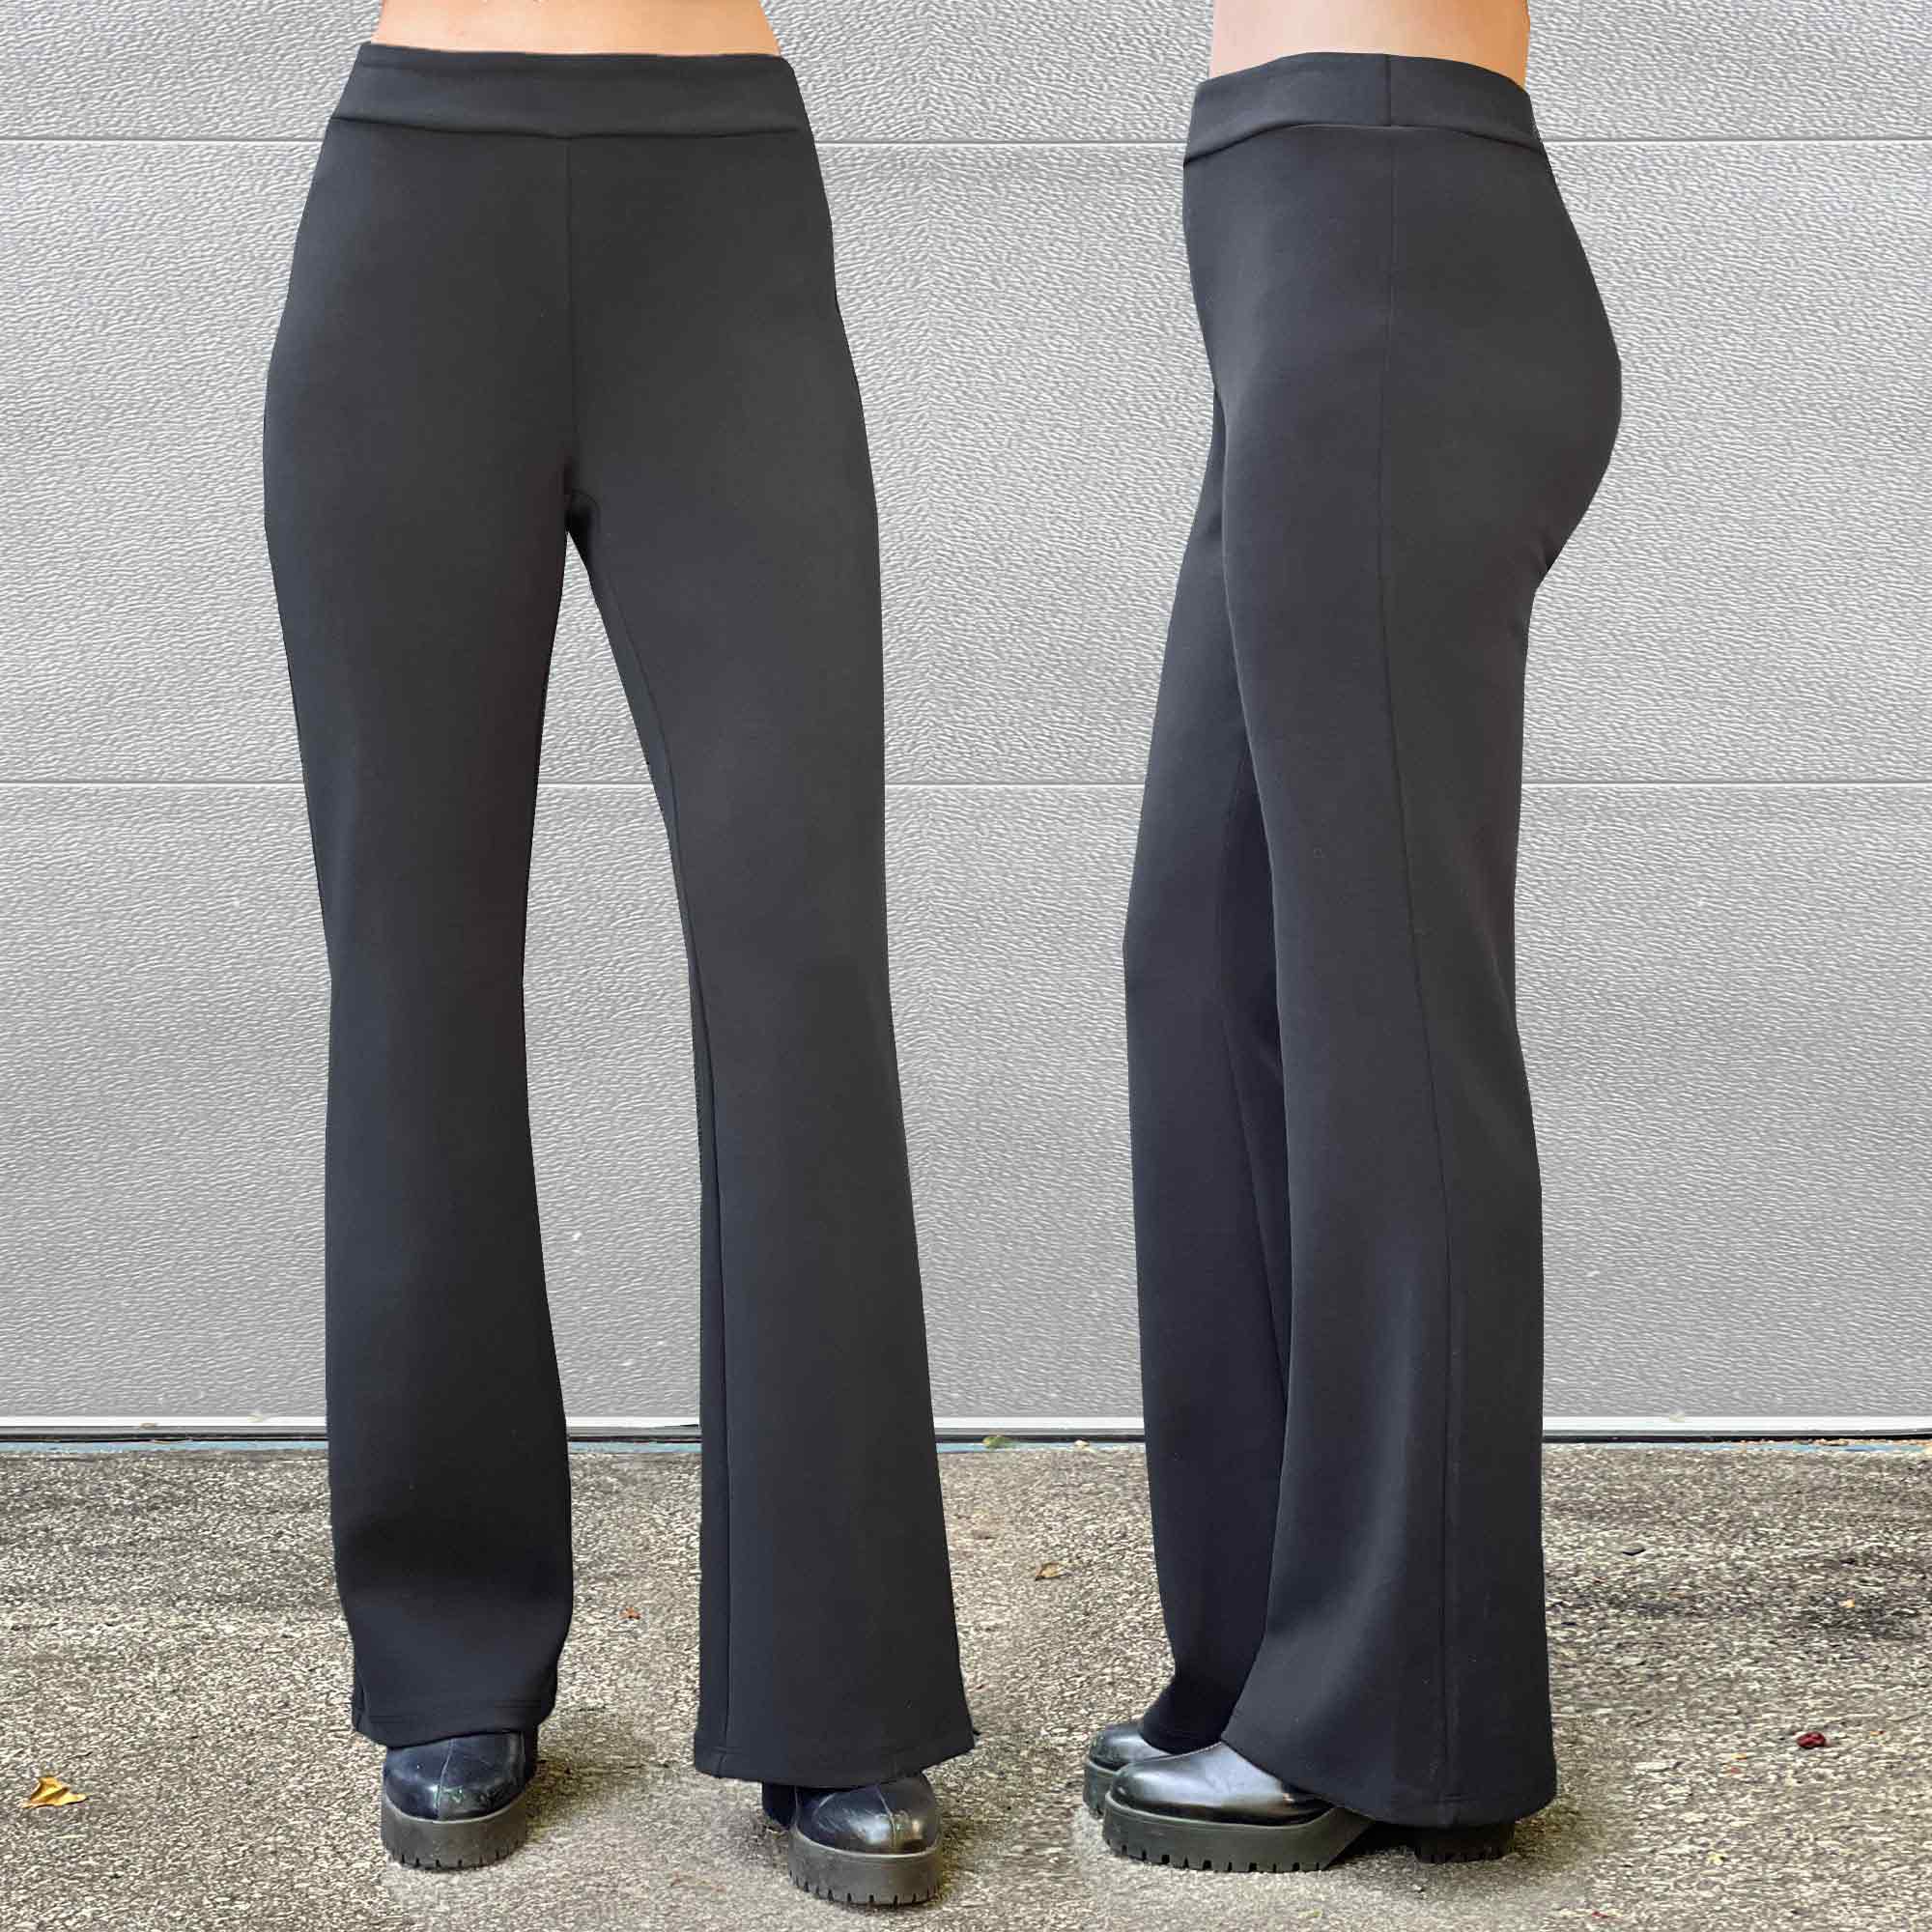 The Perfect Pant High Rise Flare- Black - Monkee's of Ridgeland